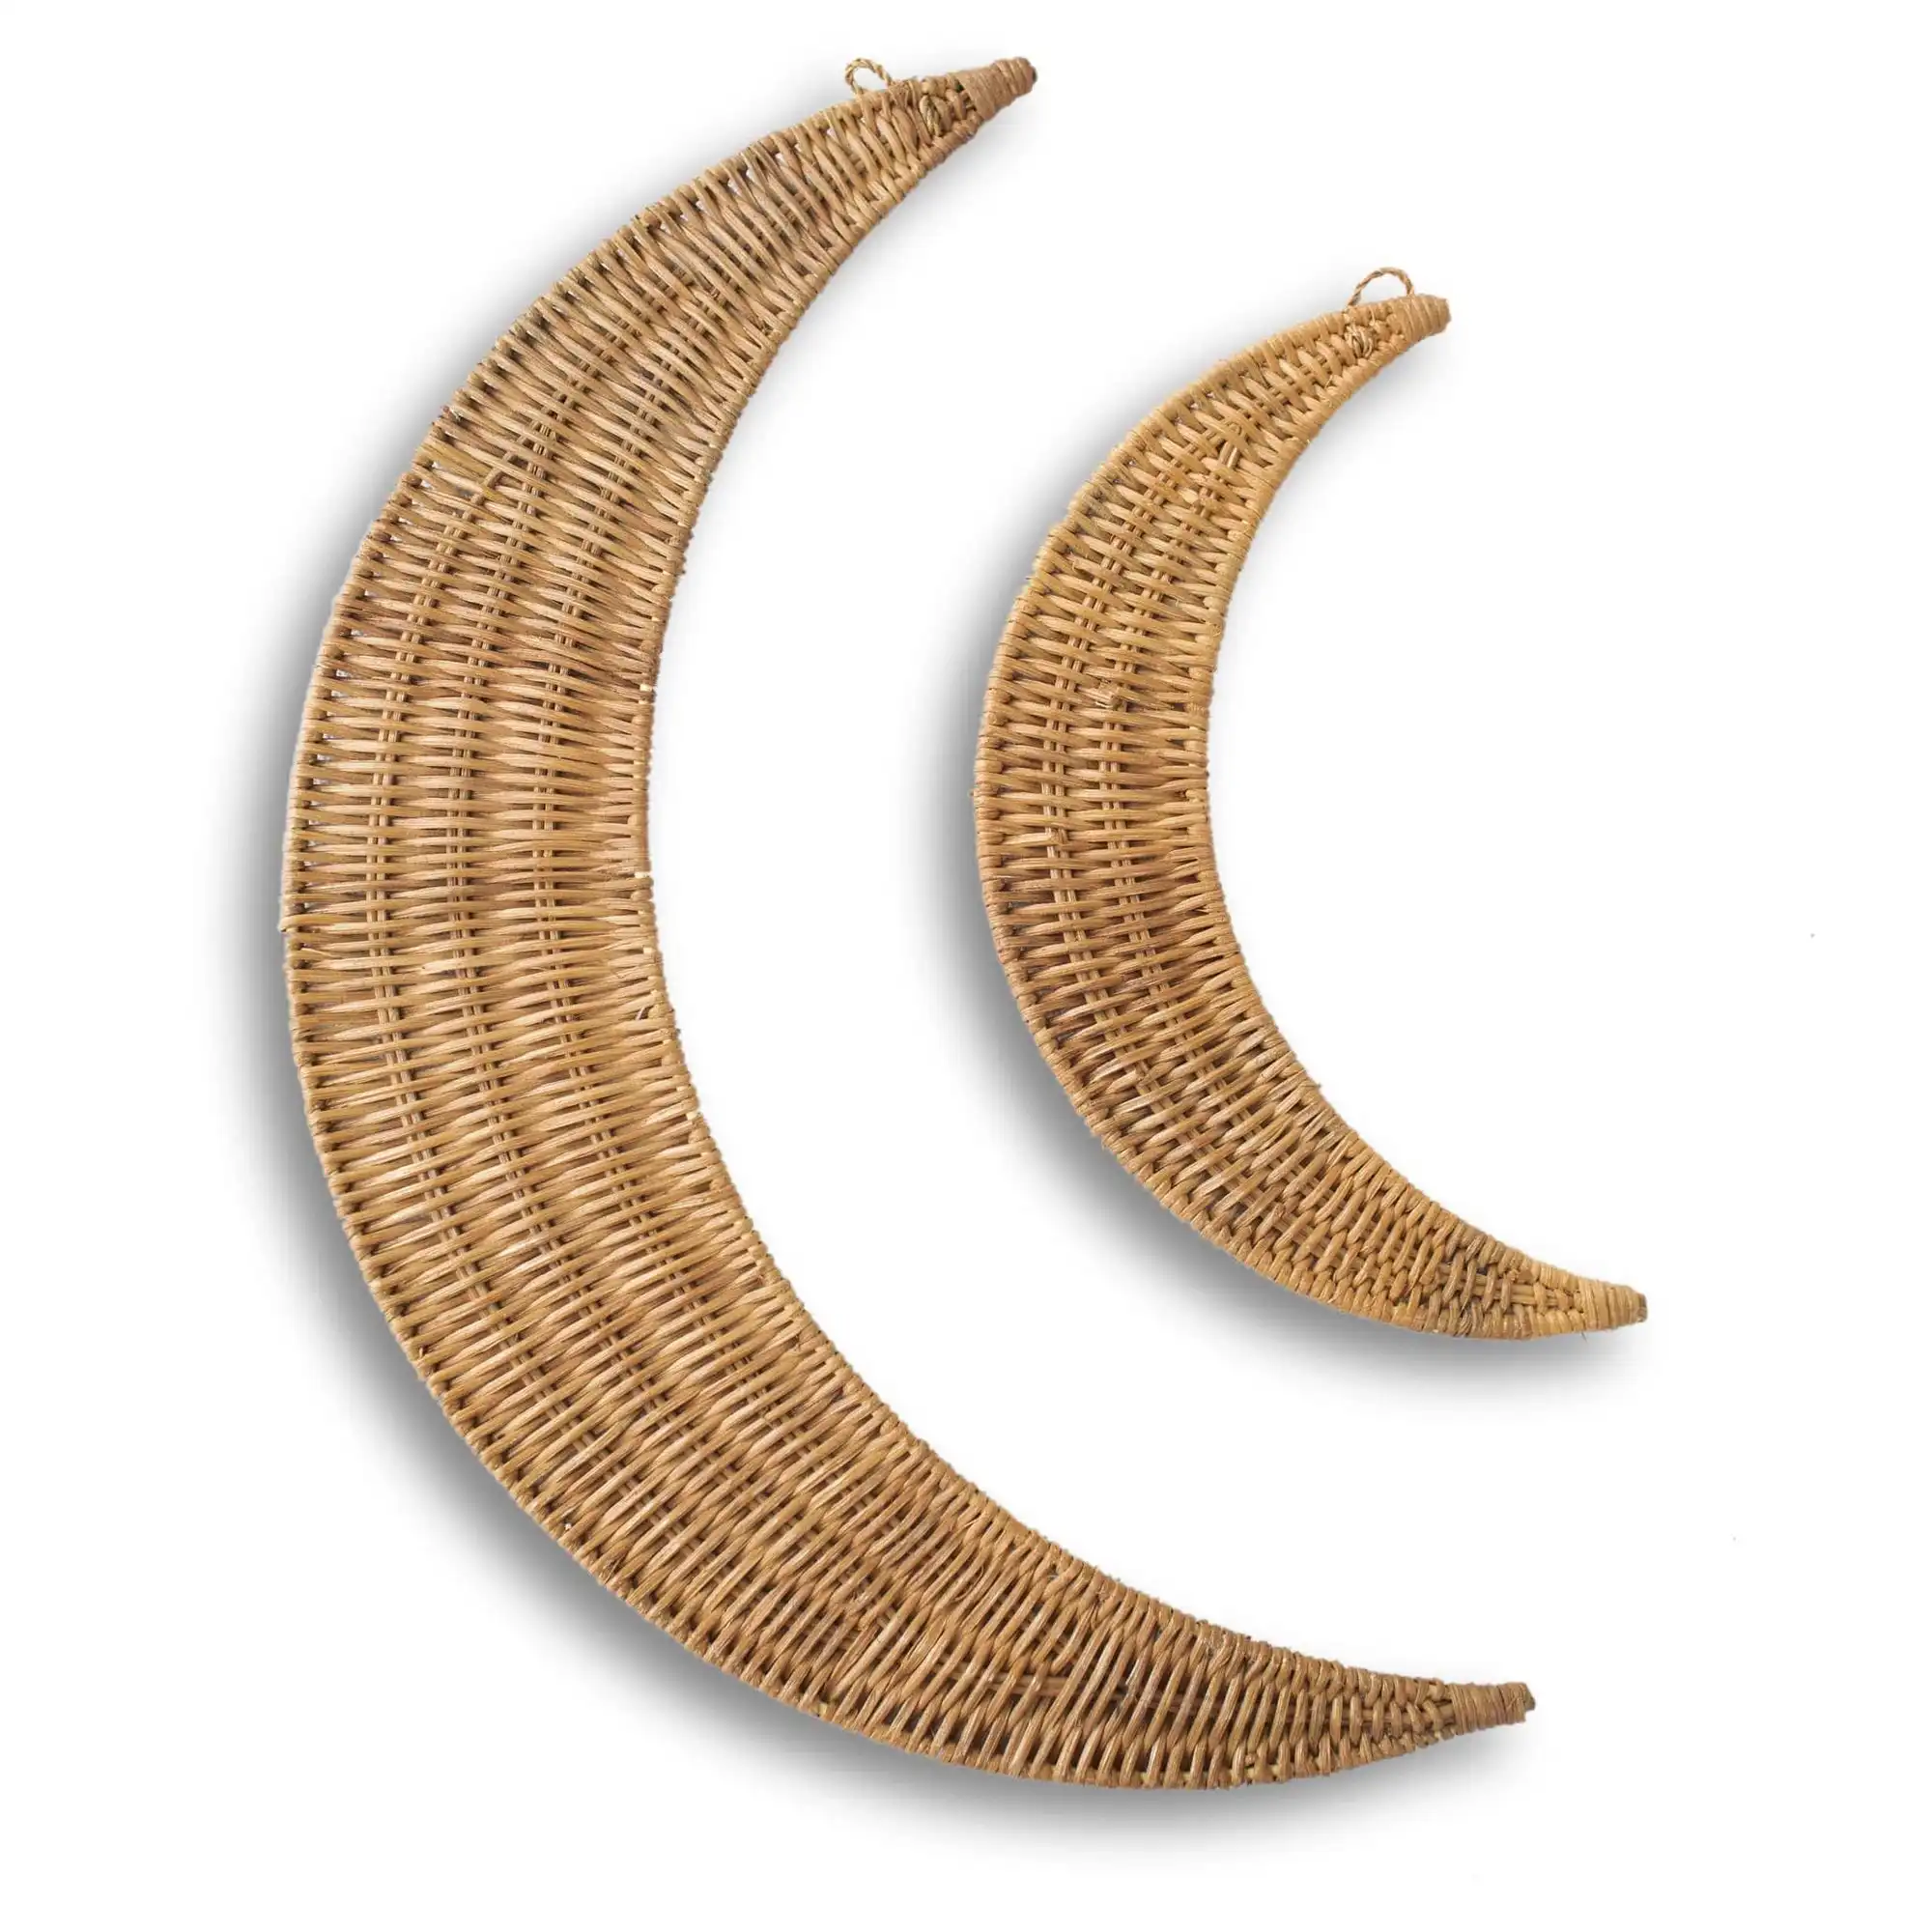 Vintage Set 2 Rattan Moons Wall Hanging Wall Art for Kid's Room Decoration Wholesale Vietnam Supplier